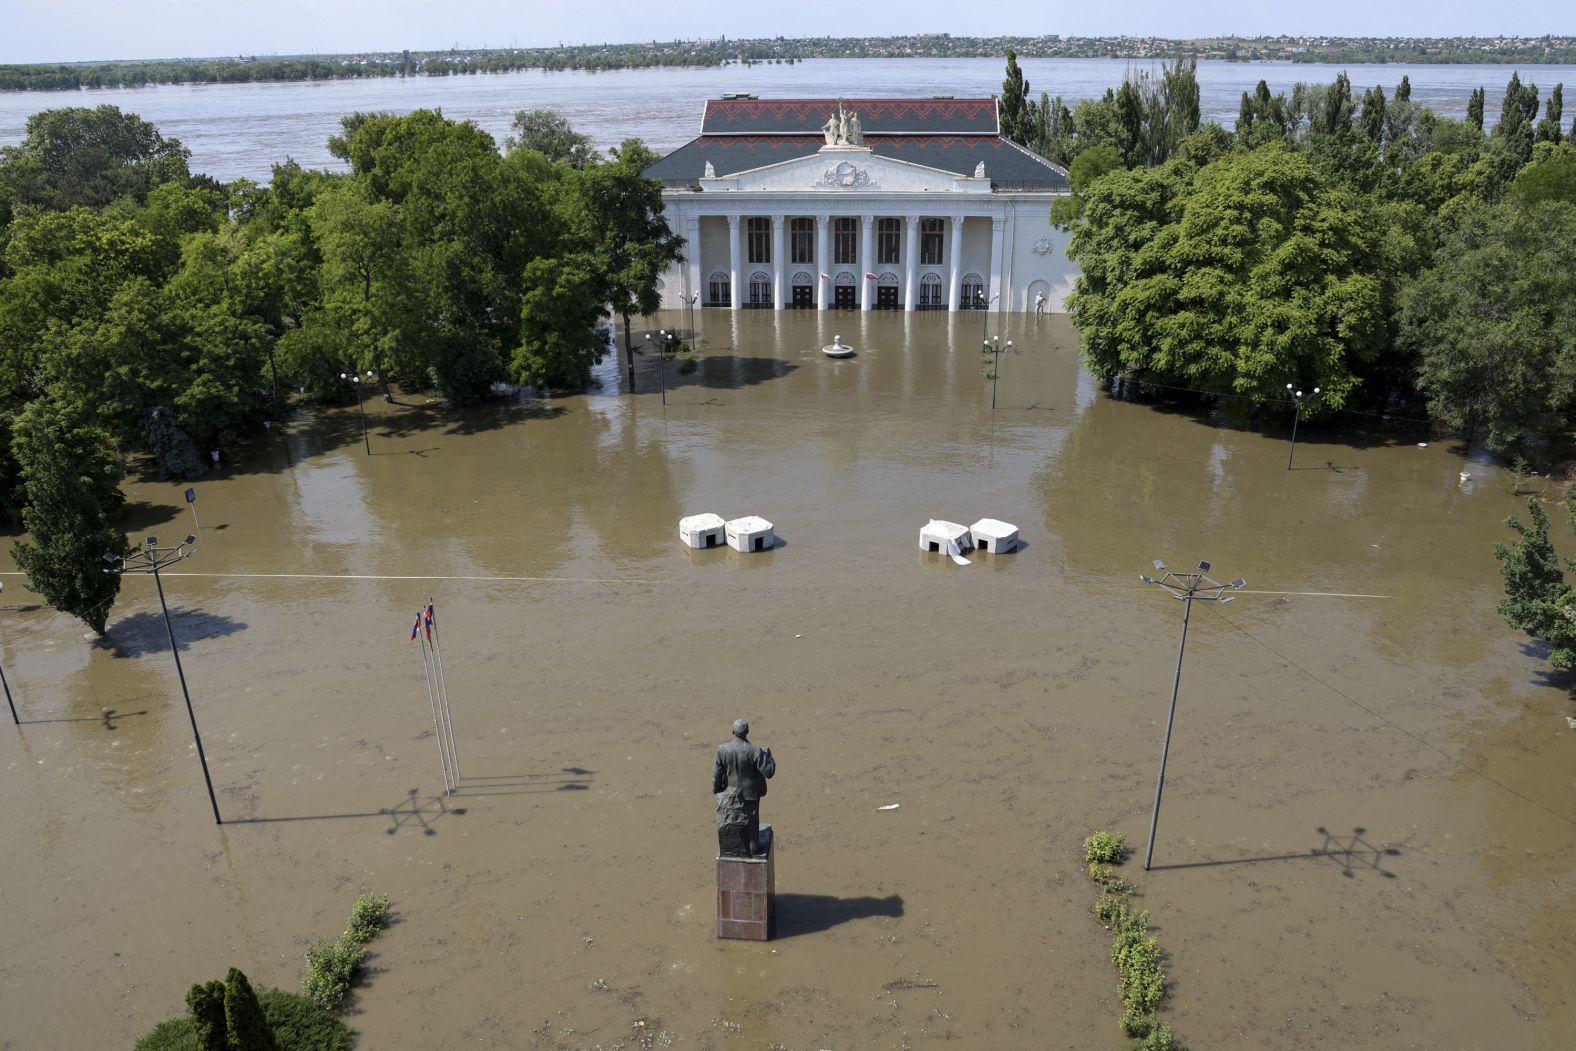 A view shows the House of Culture on a flooded street in Nova Kakhovka.